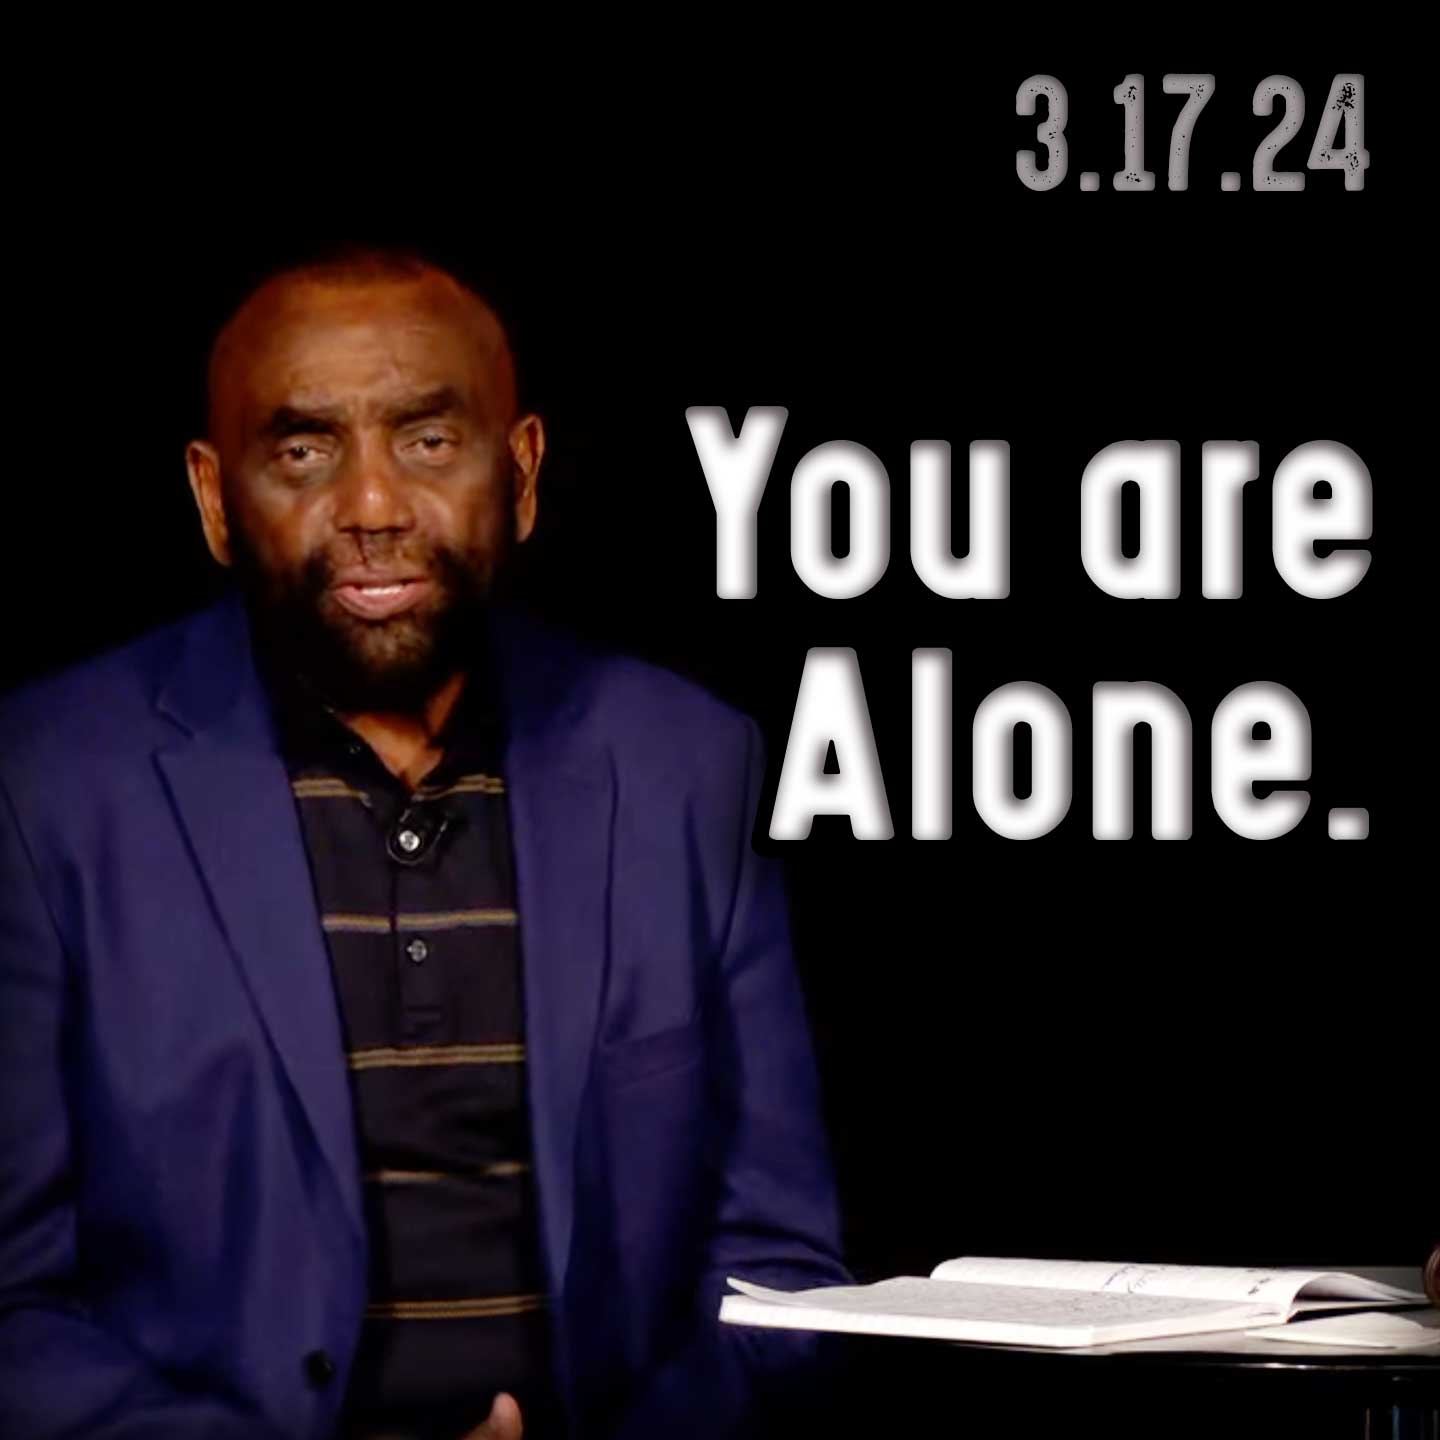 The way you think vs the way you are | Church 3/17/24 (You are alone.)